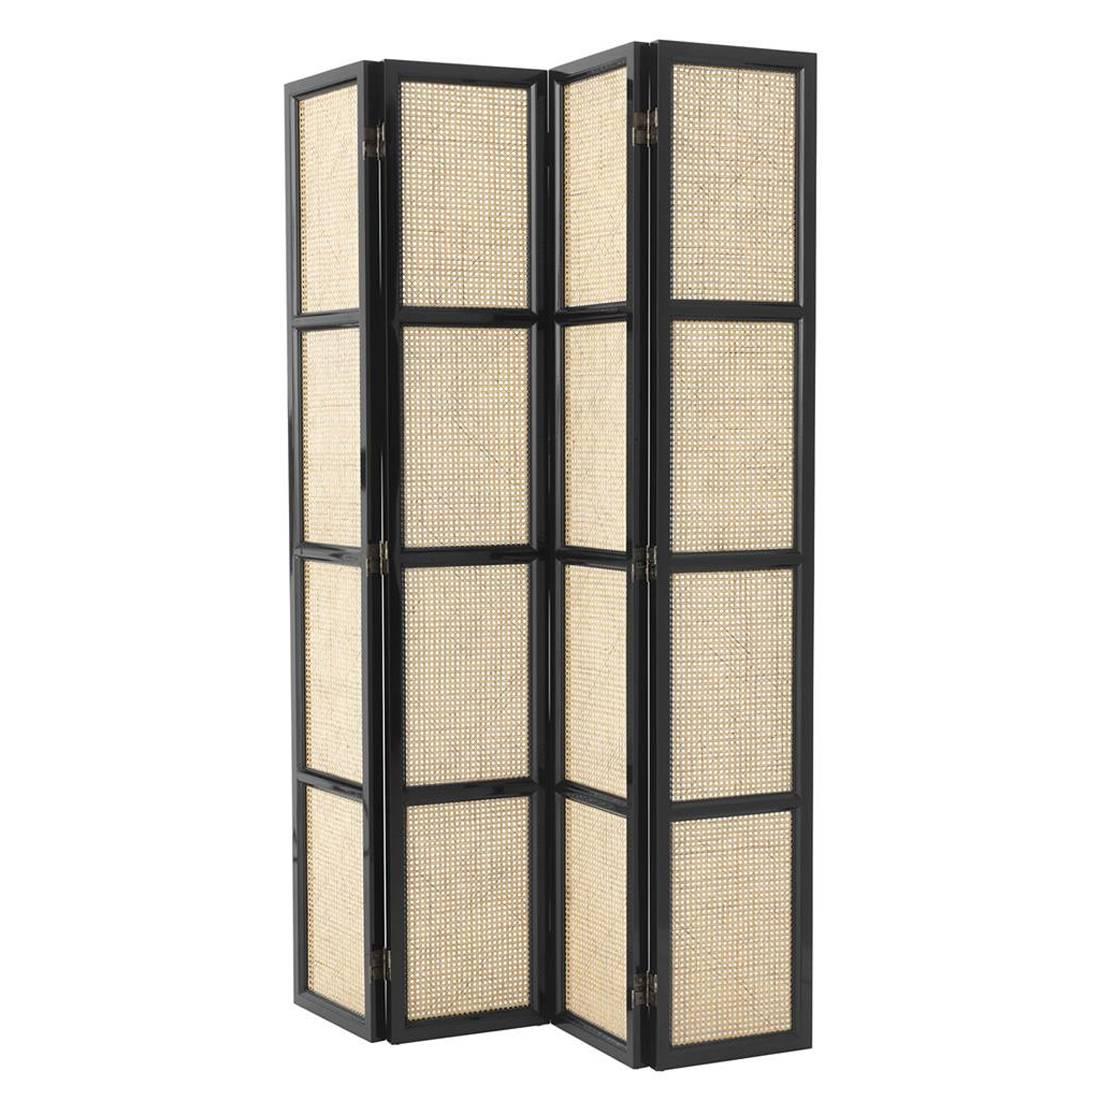 Evora Folding Screen in Black Lacquered Solid Mahogany Wood